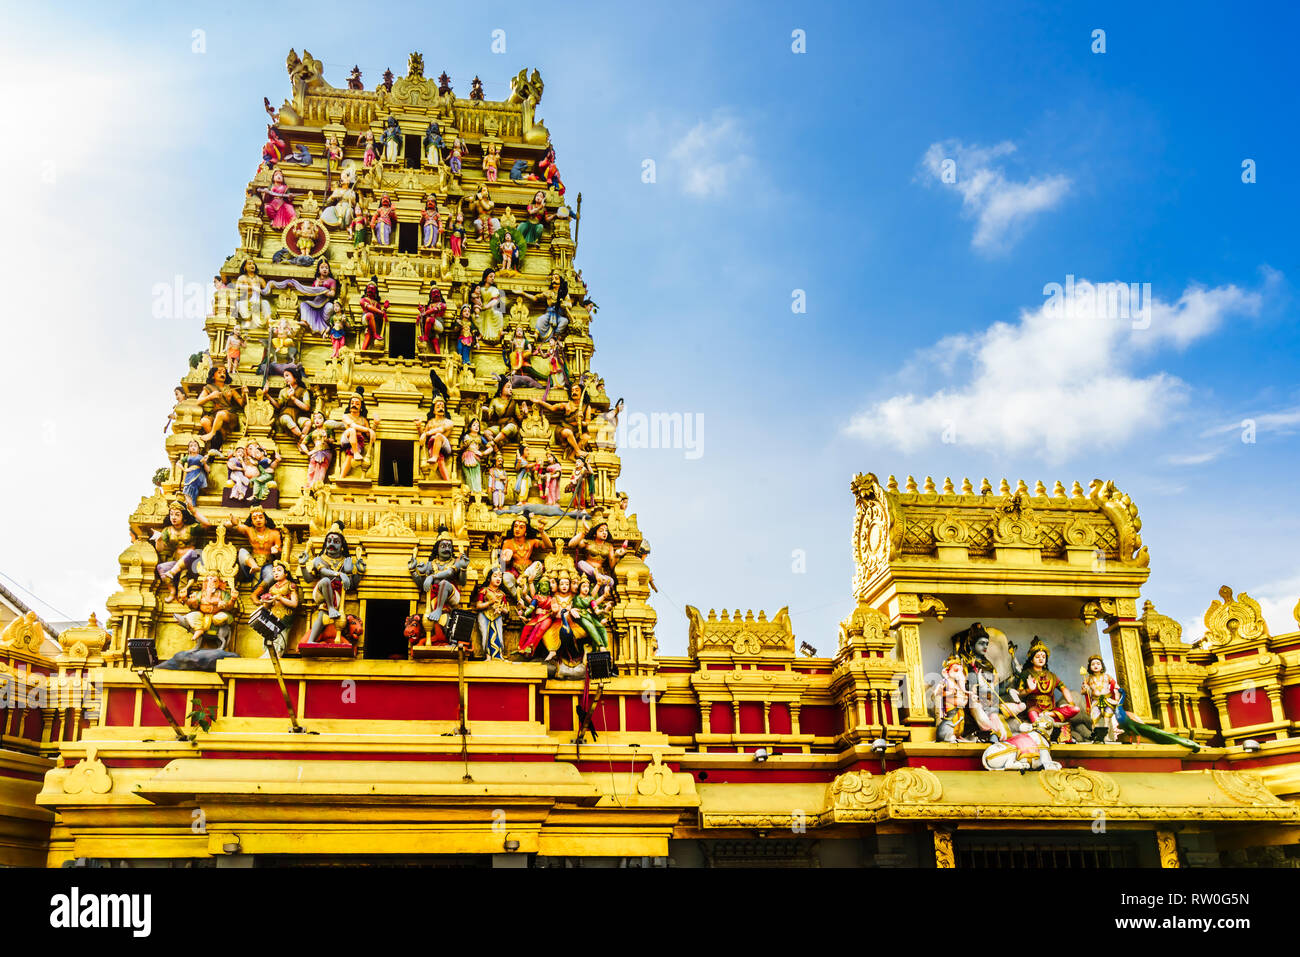 View on COLORFUL HINDU TEMPLE IN COLOMBO, SRI LANKA Stock Photo